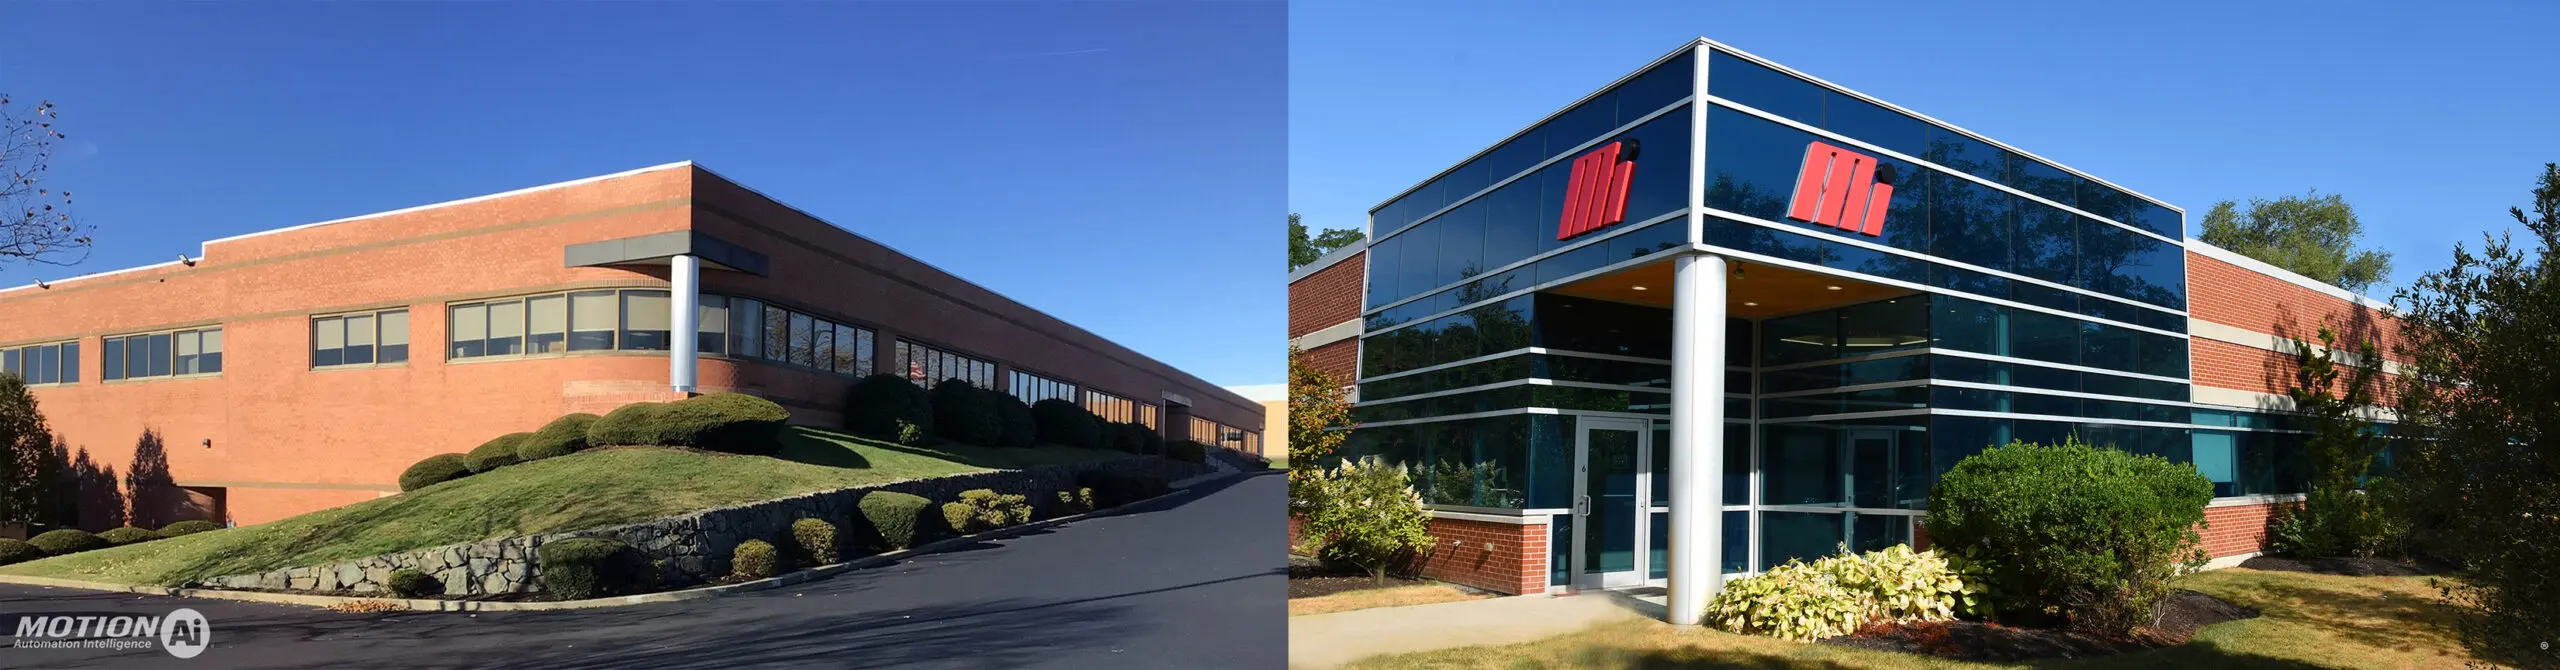 Two Motion Ai buildings in Massachusetts